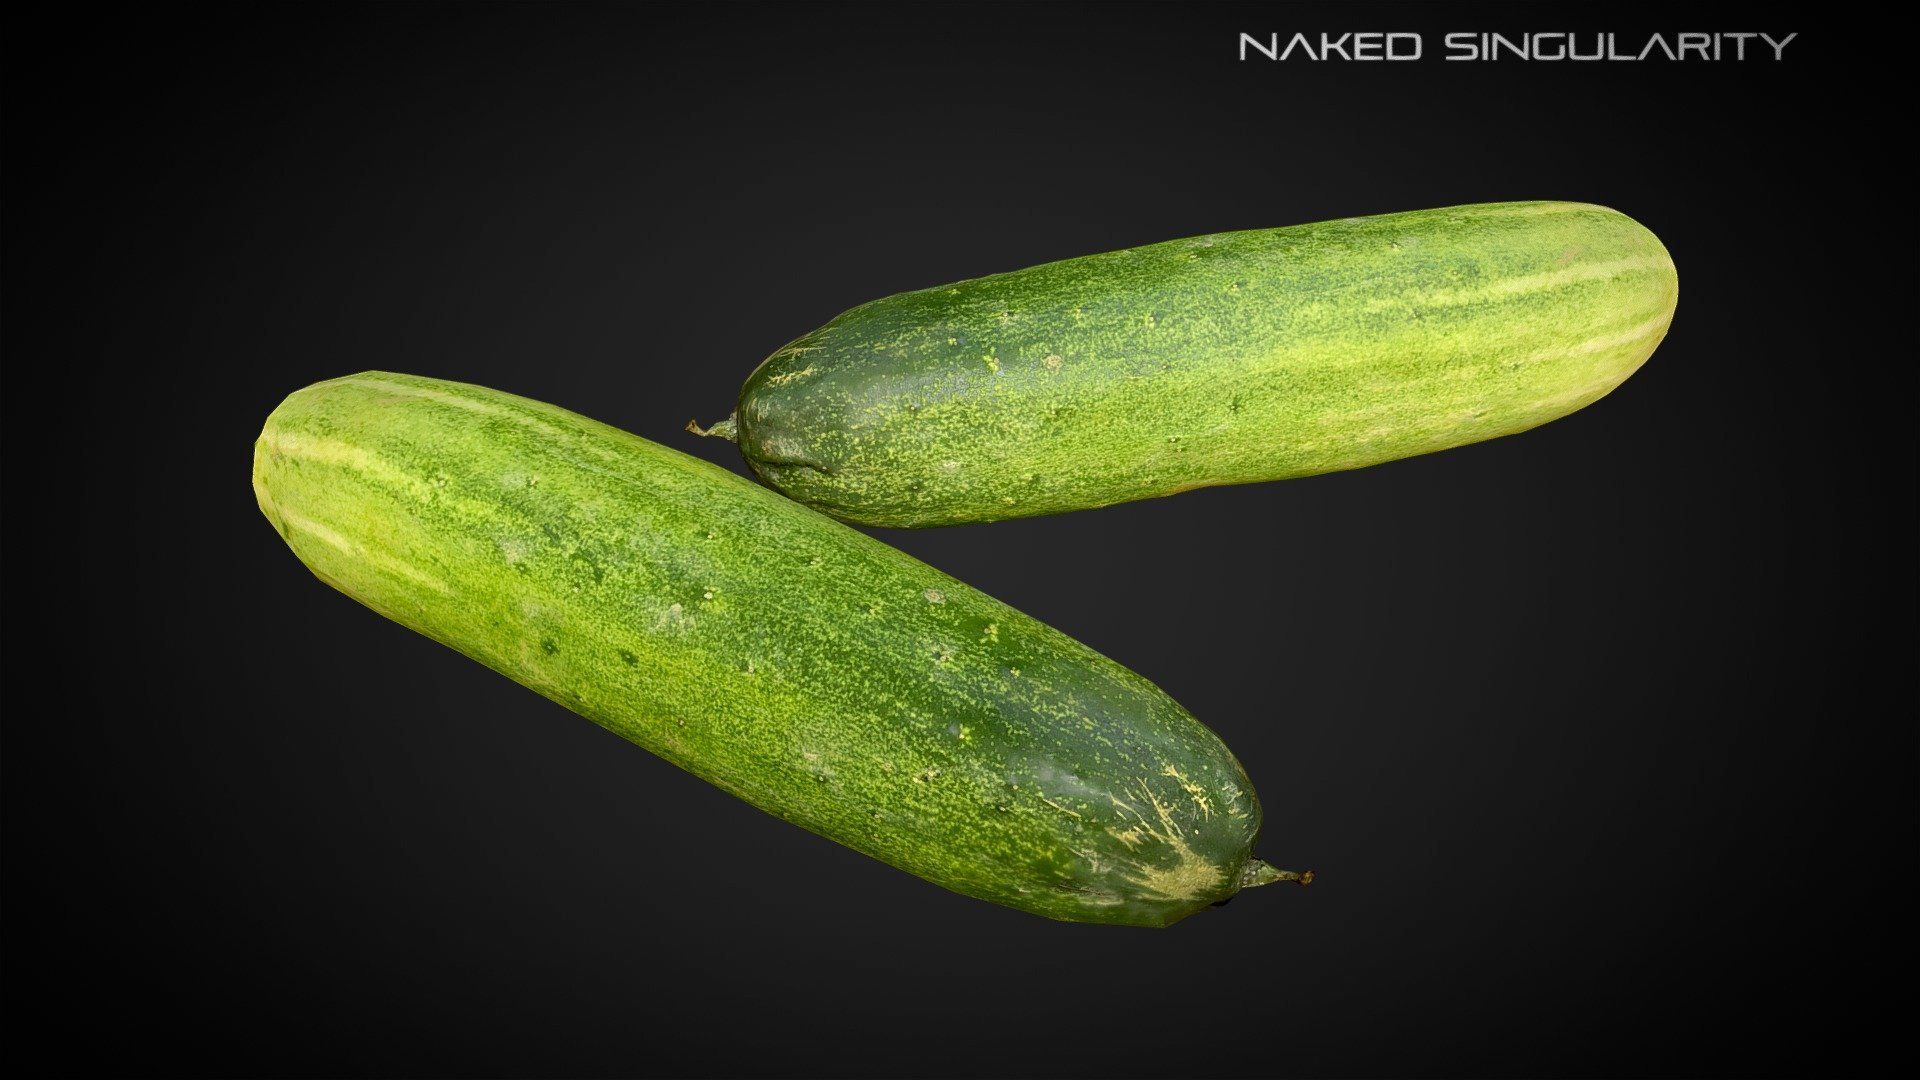 3D Scan Vegetable - Cucumber photogrammetry 4K


High quality 3d scan / photogrammetry of a Cucumber ( vegetable fruit ). 
4K Textures.
Include low poly (460 tris) and high poly (147k tris) version.
UV channel 2 unwrapped (for lightmap in Unity, Unreal Engine).

Check out other vegetable models here

Customer support: nakedsingularity.studio@gmail.com

Youtube

Facebook - 3D Scan Vegetable - Cucumber photogrammetry 4K - Buy Royalty Free 3D model by Naked Singularity (@nakedsingularity) 3d model